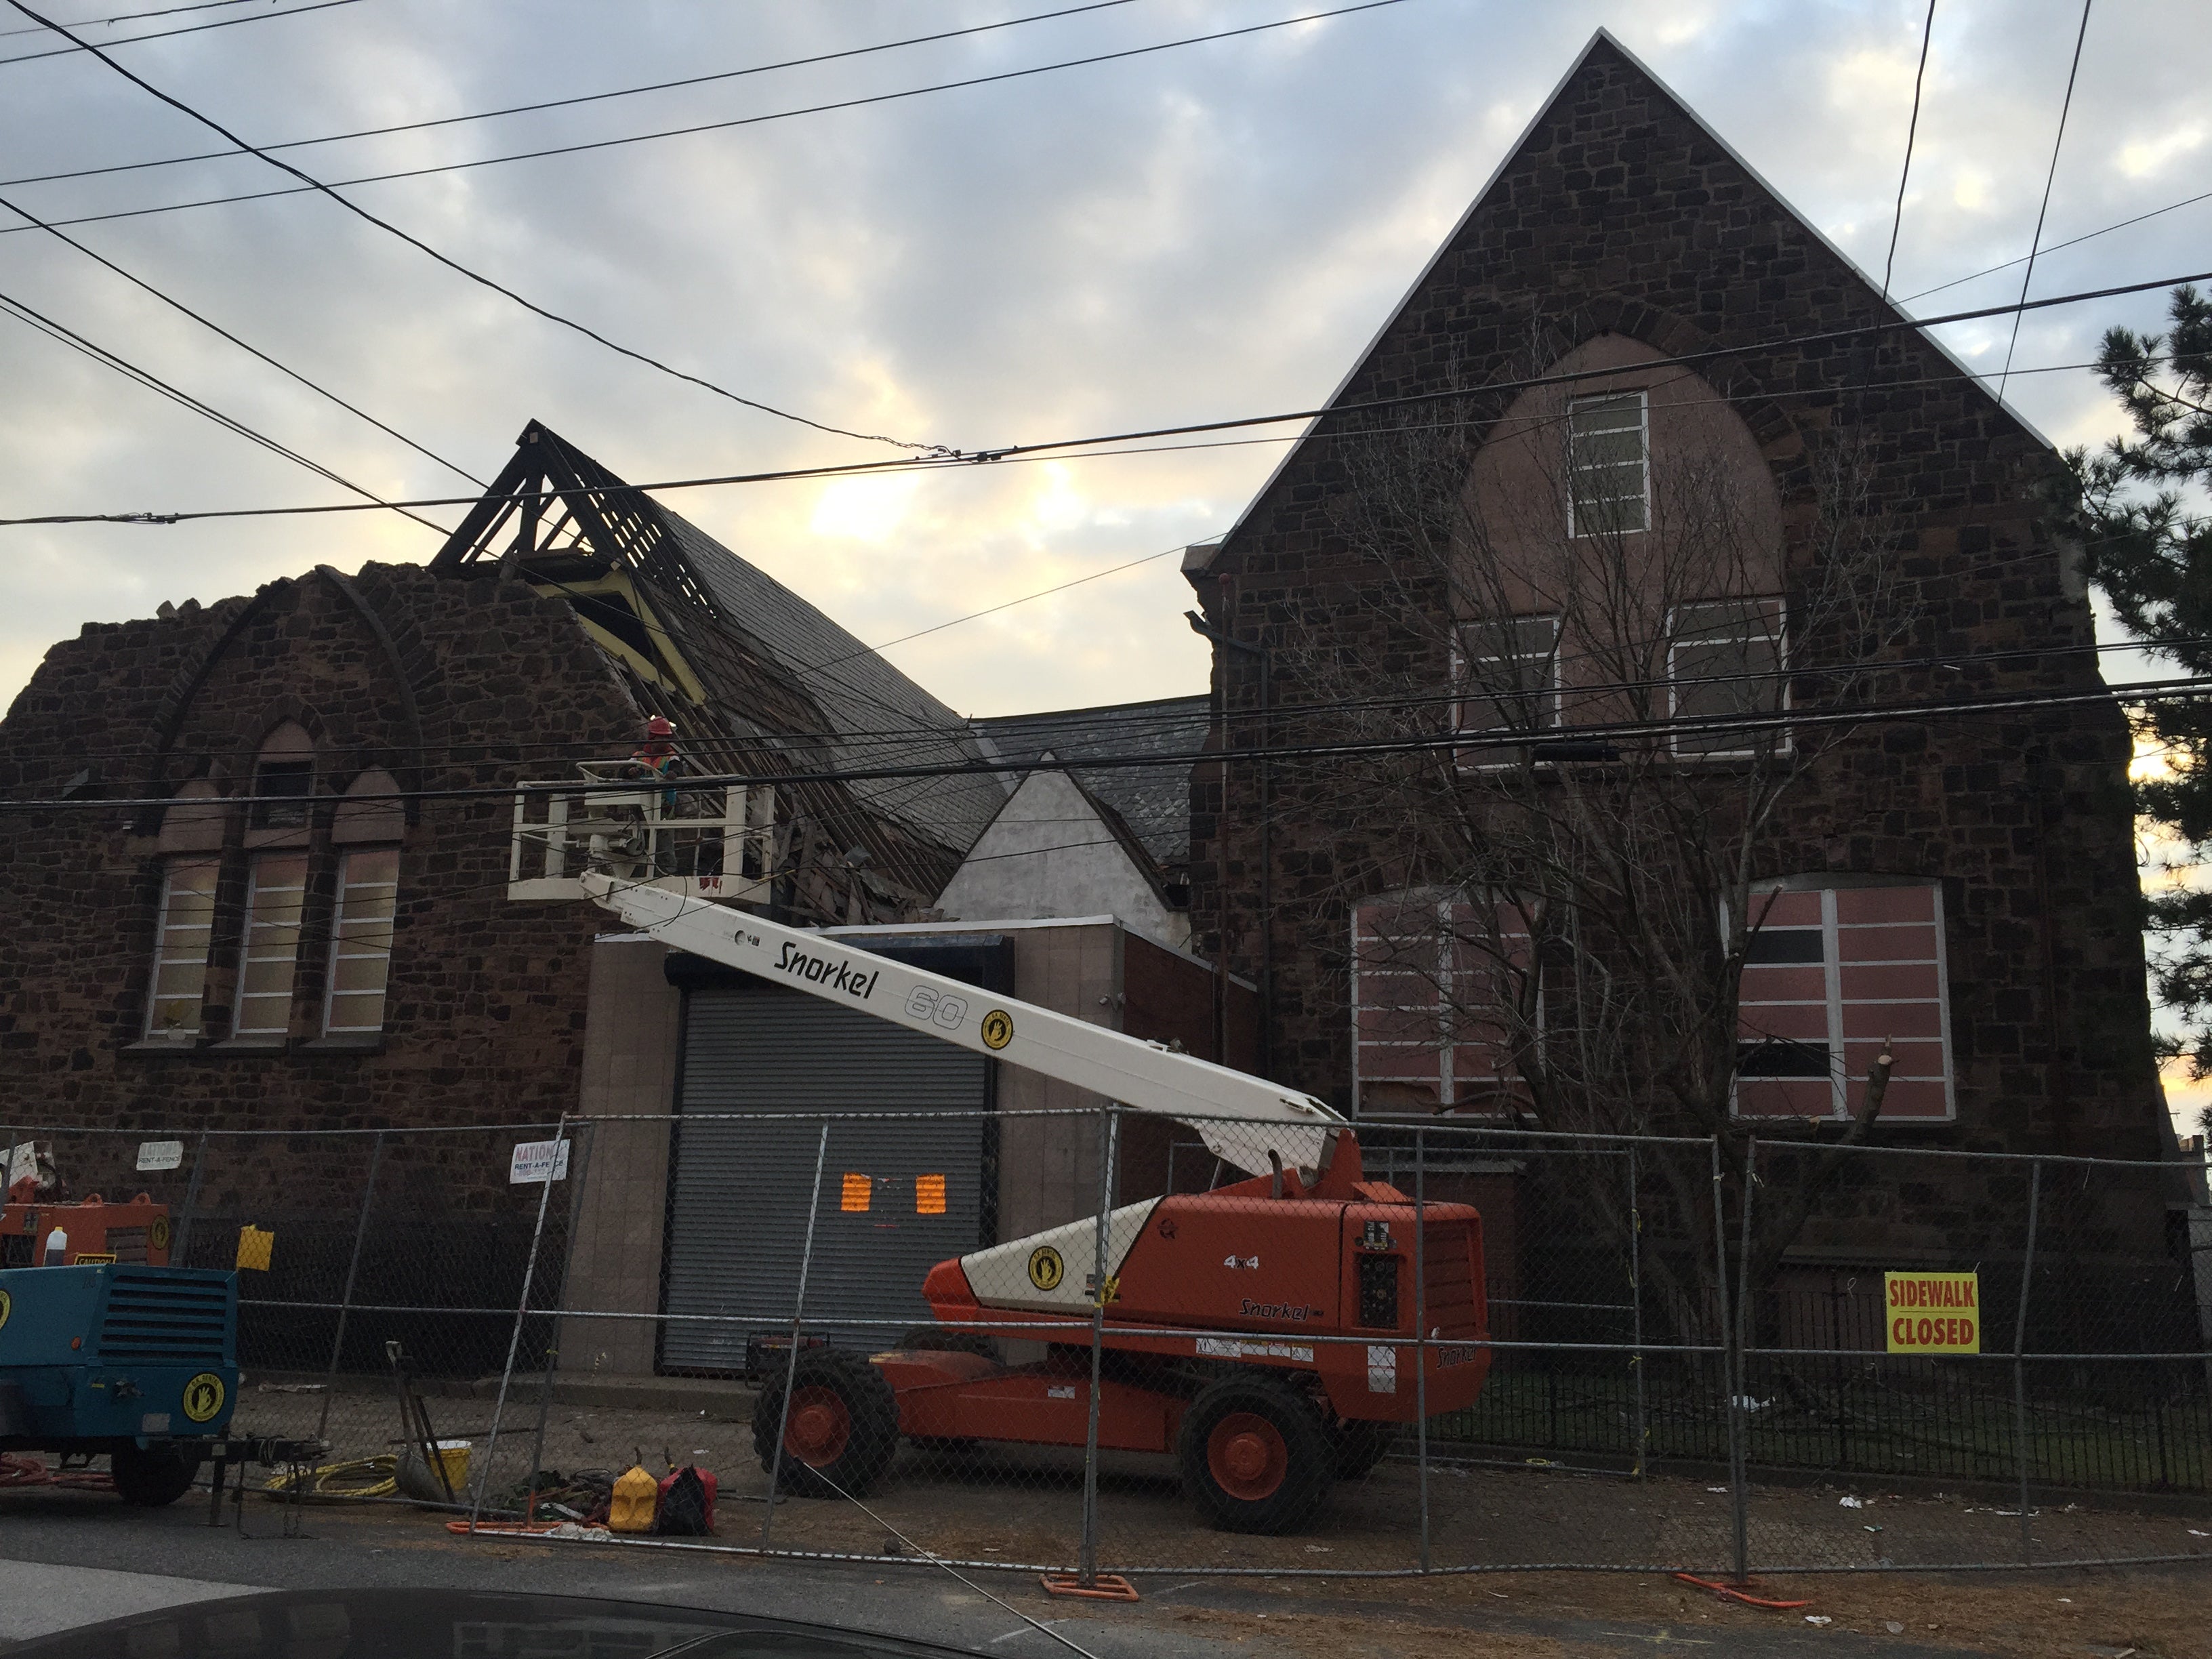 Protestant Church of the Messiah demolition underway | Andrew Fearon